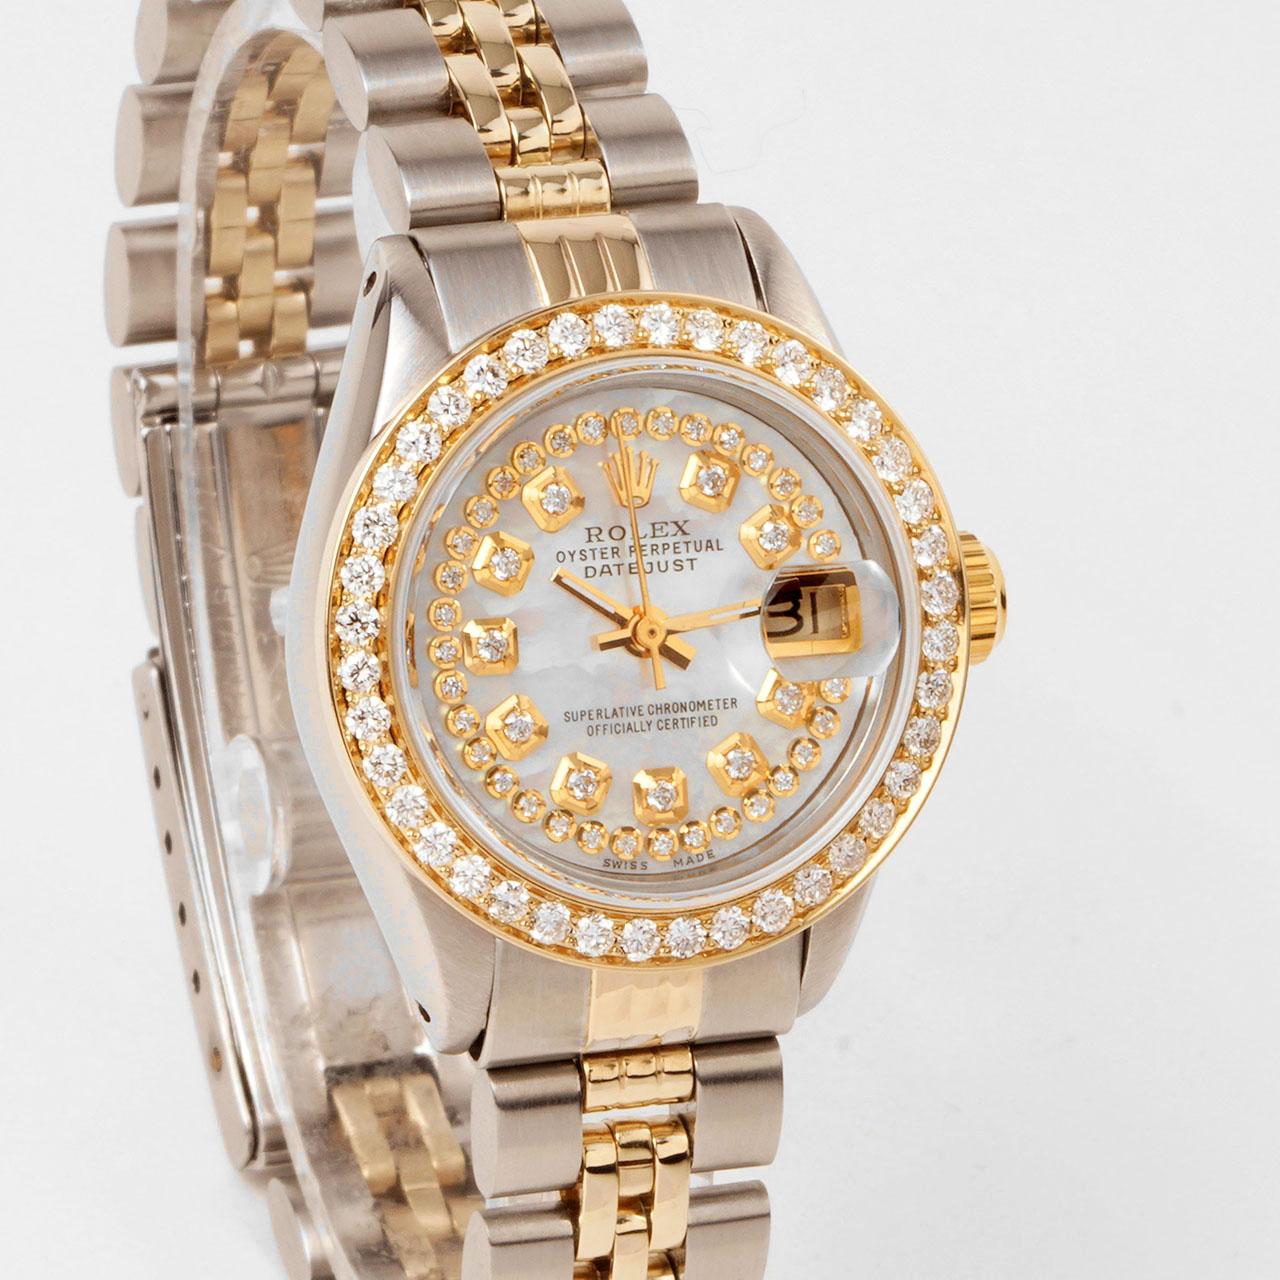 Swiss Wrist - SKU 6917-TT-MOP-DIA-AM-BDS-JBL

Brand : Rolex
Model : Datejust (Non-Quickset Model)
Gender : Ladies
Metals : 14K/Stainless Steel
Case Size : 26 mm

Dial : Custom Mother Of Pearl Diamond Dial (This dial is not original Rolex And has